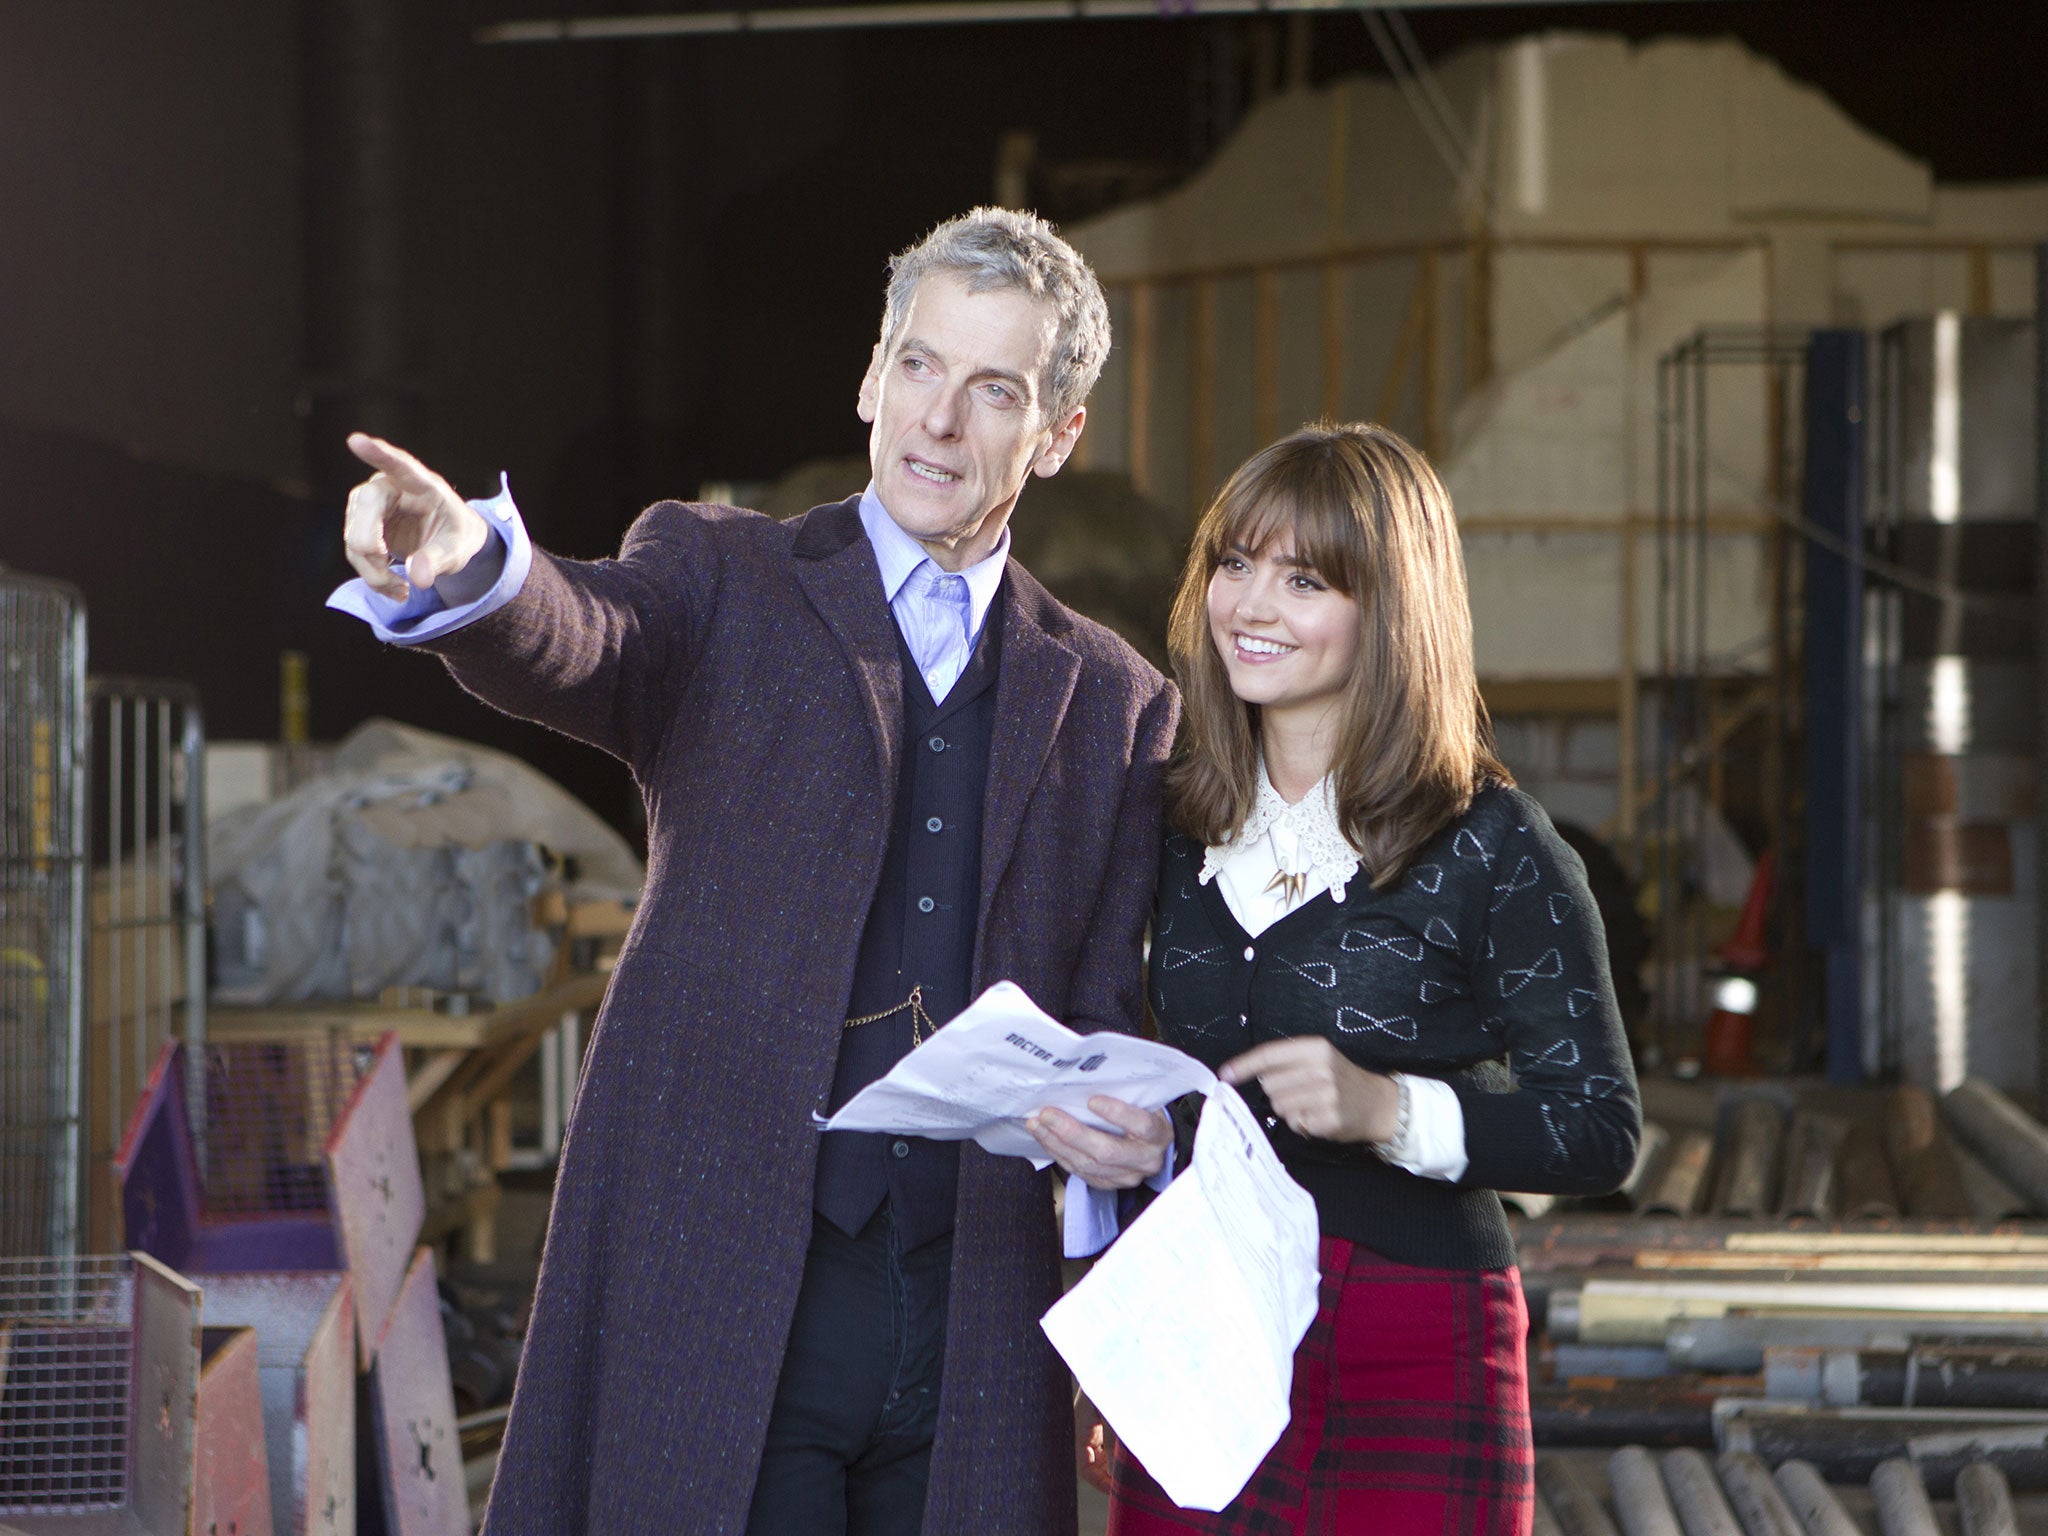 Peter Capaldi and Jenna Coleman as Doctor Who and Clara behind the scenes